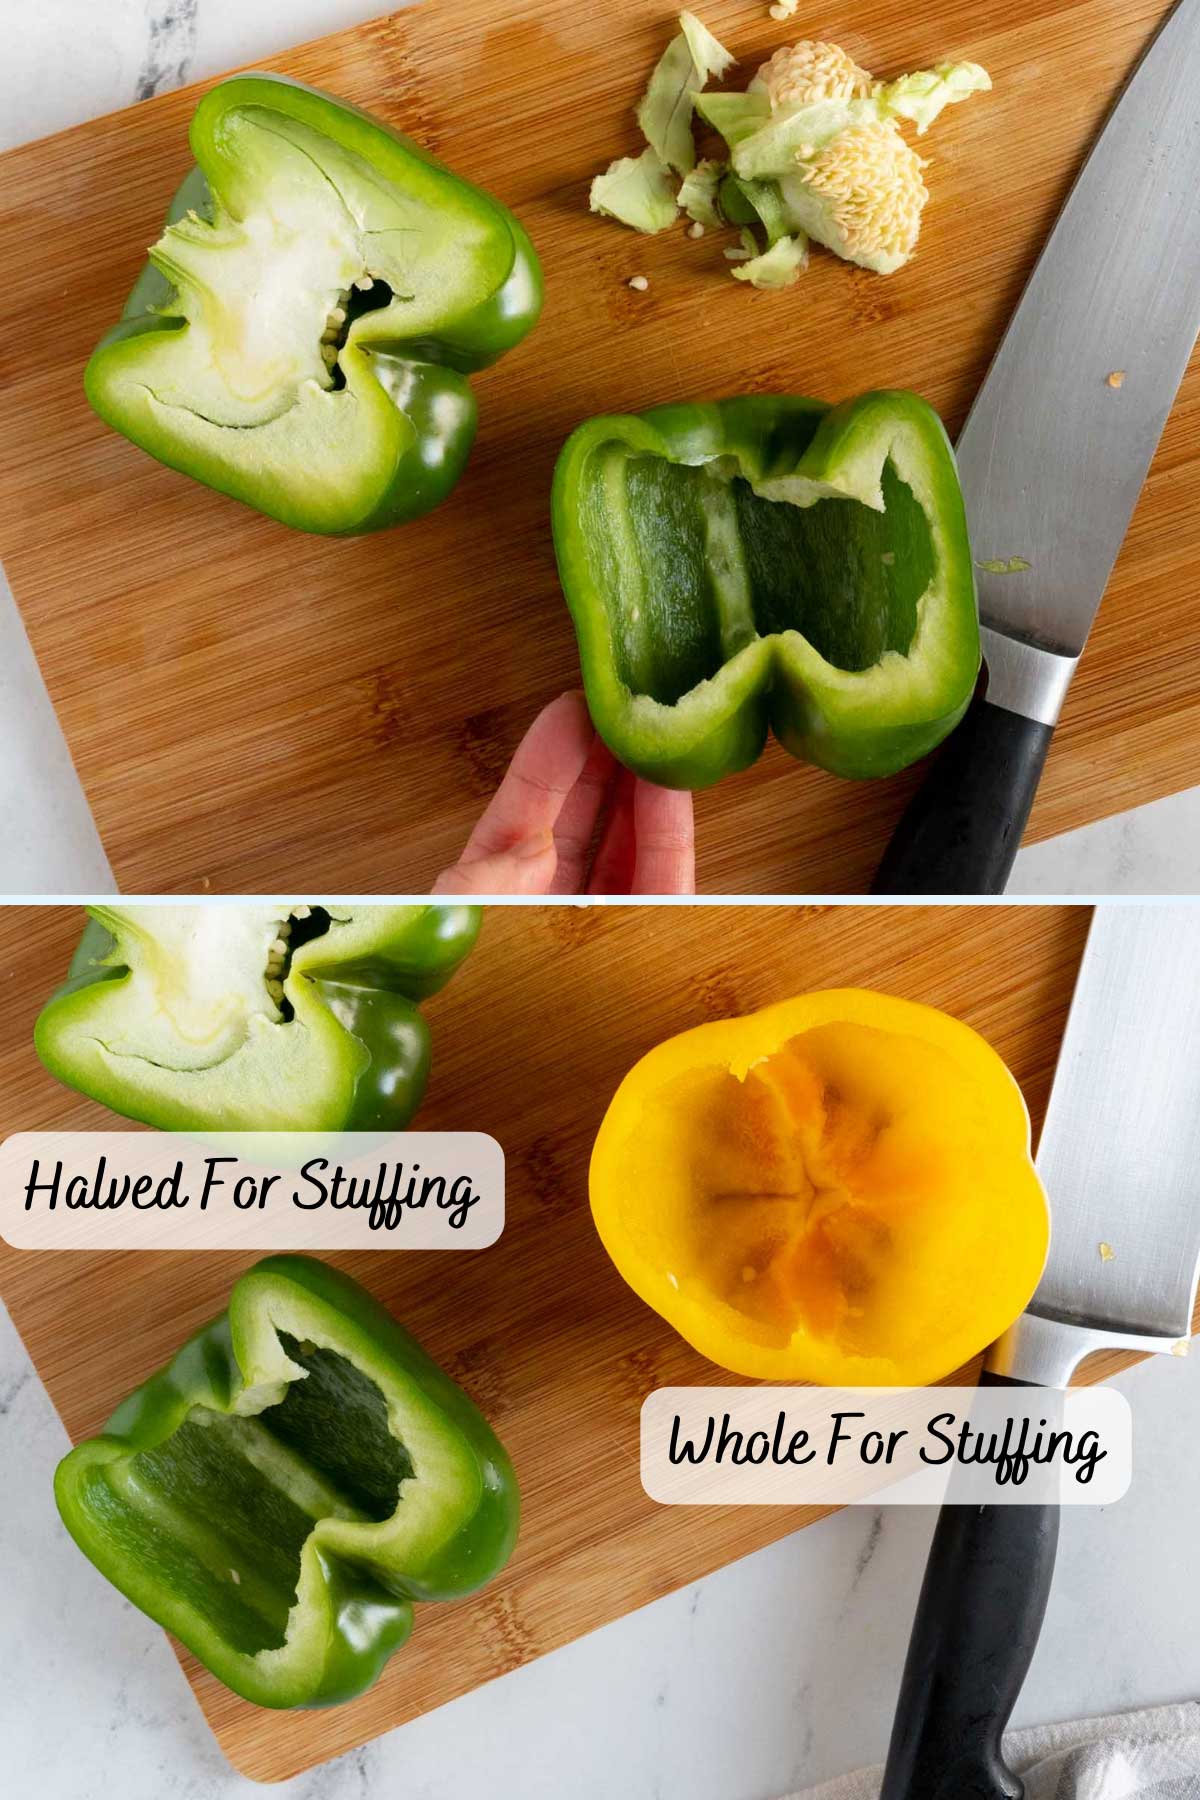 Two ways to cut peppers for making stuffed peppers.